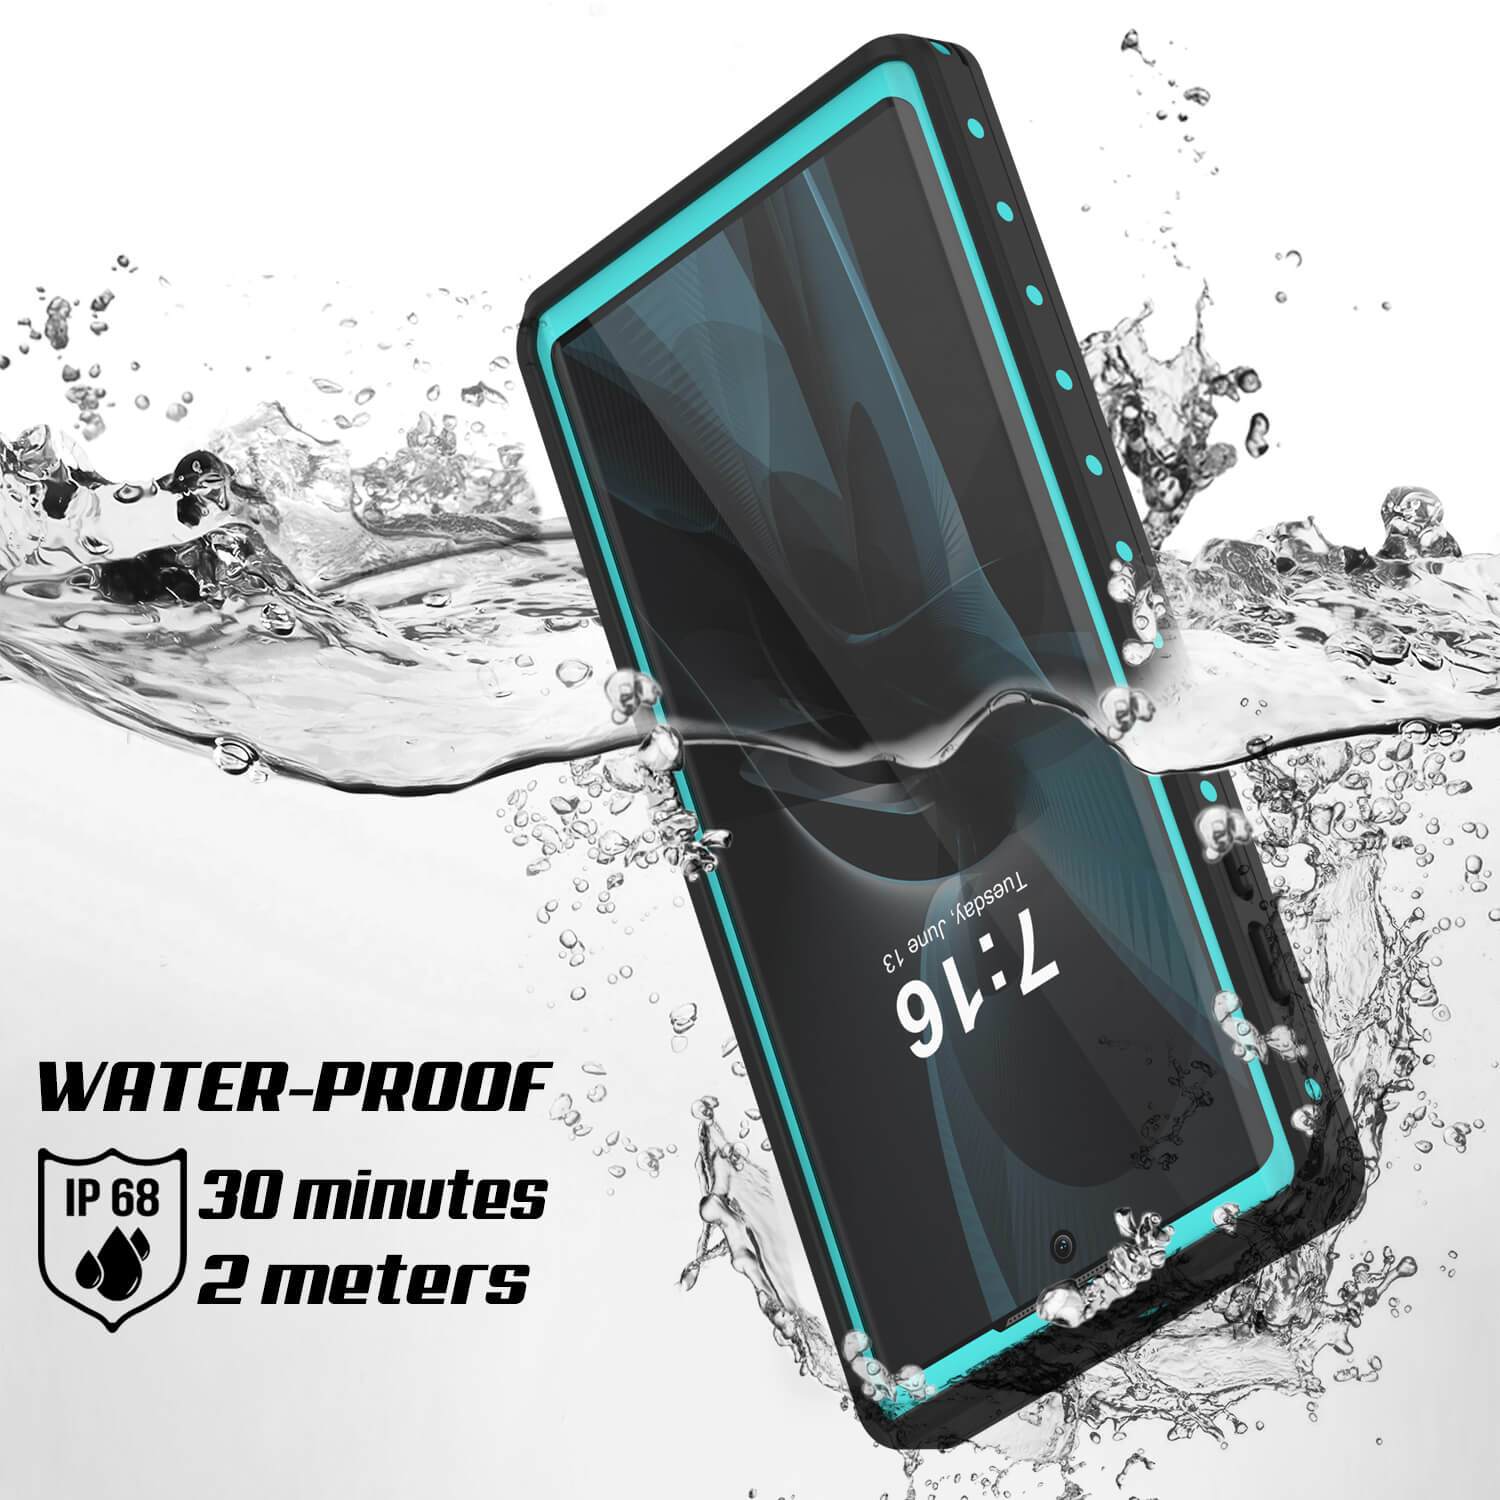 Galaxy Note 10 Waterproof Case, Punkcase Studstar Series Teal Thin Armor Cover